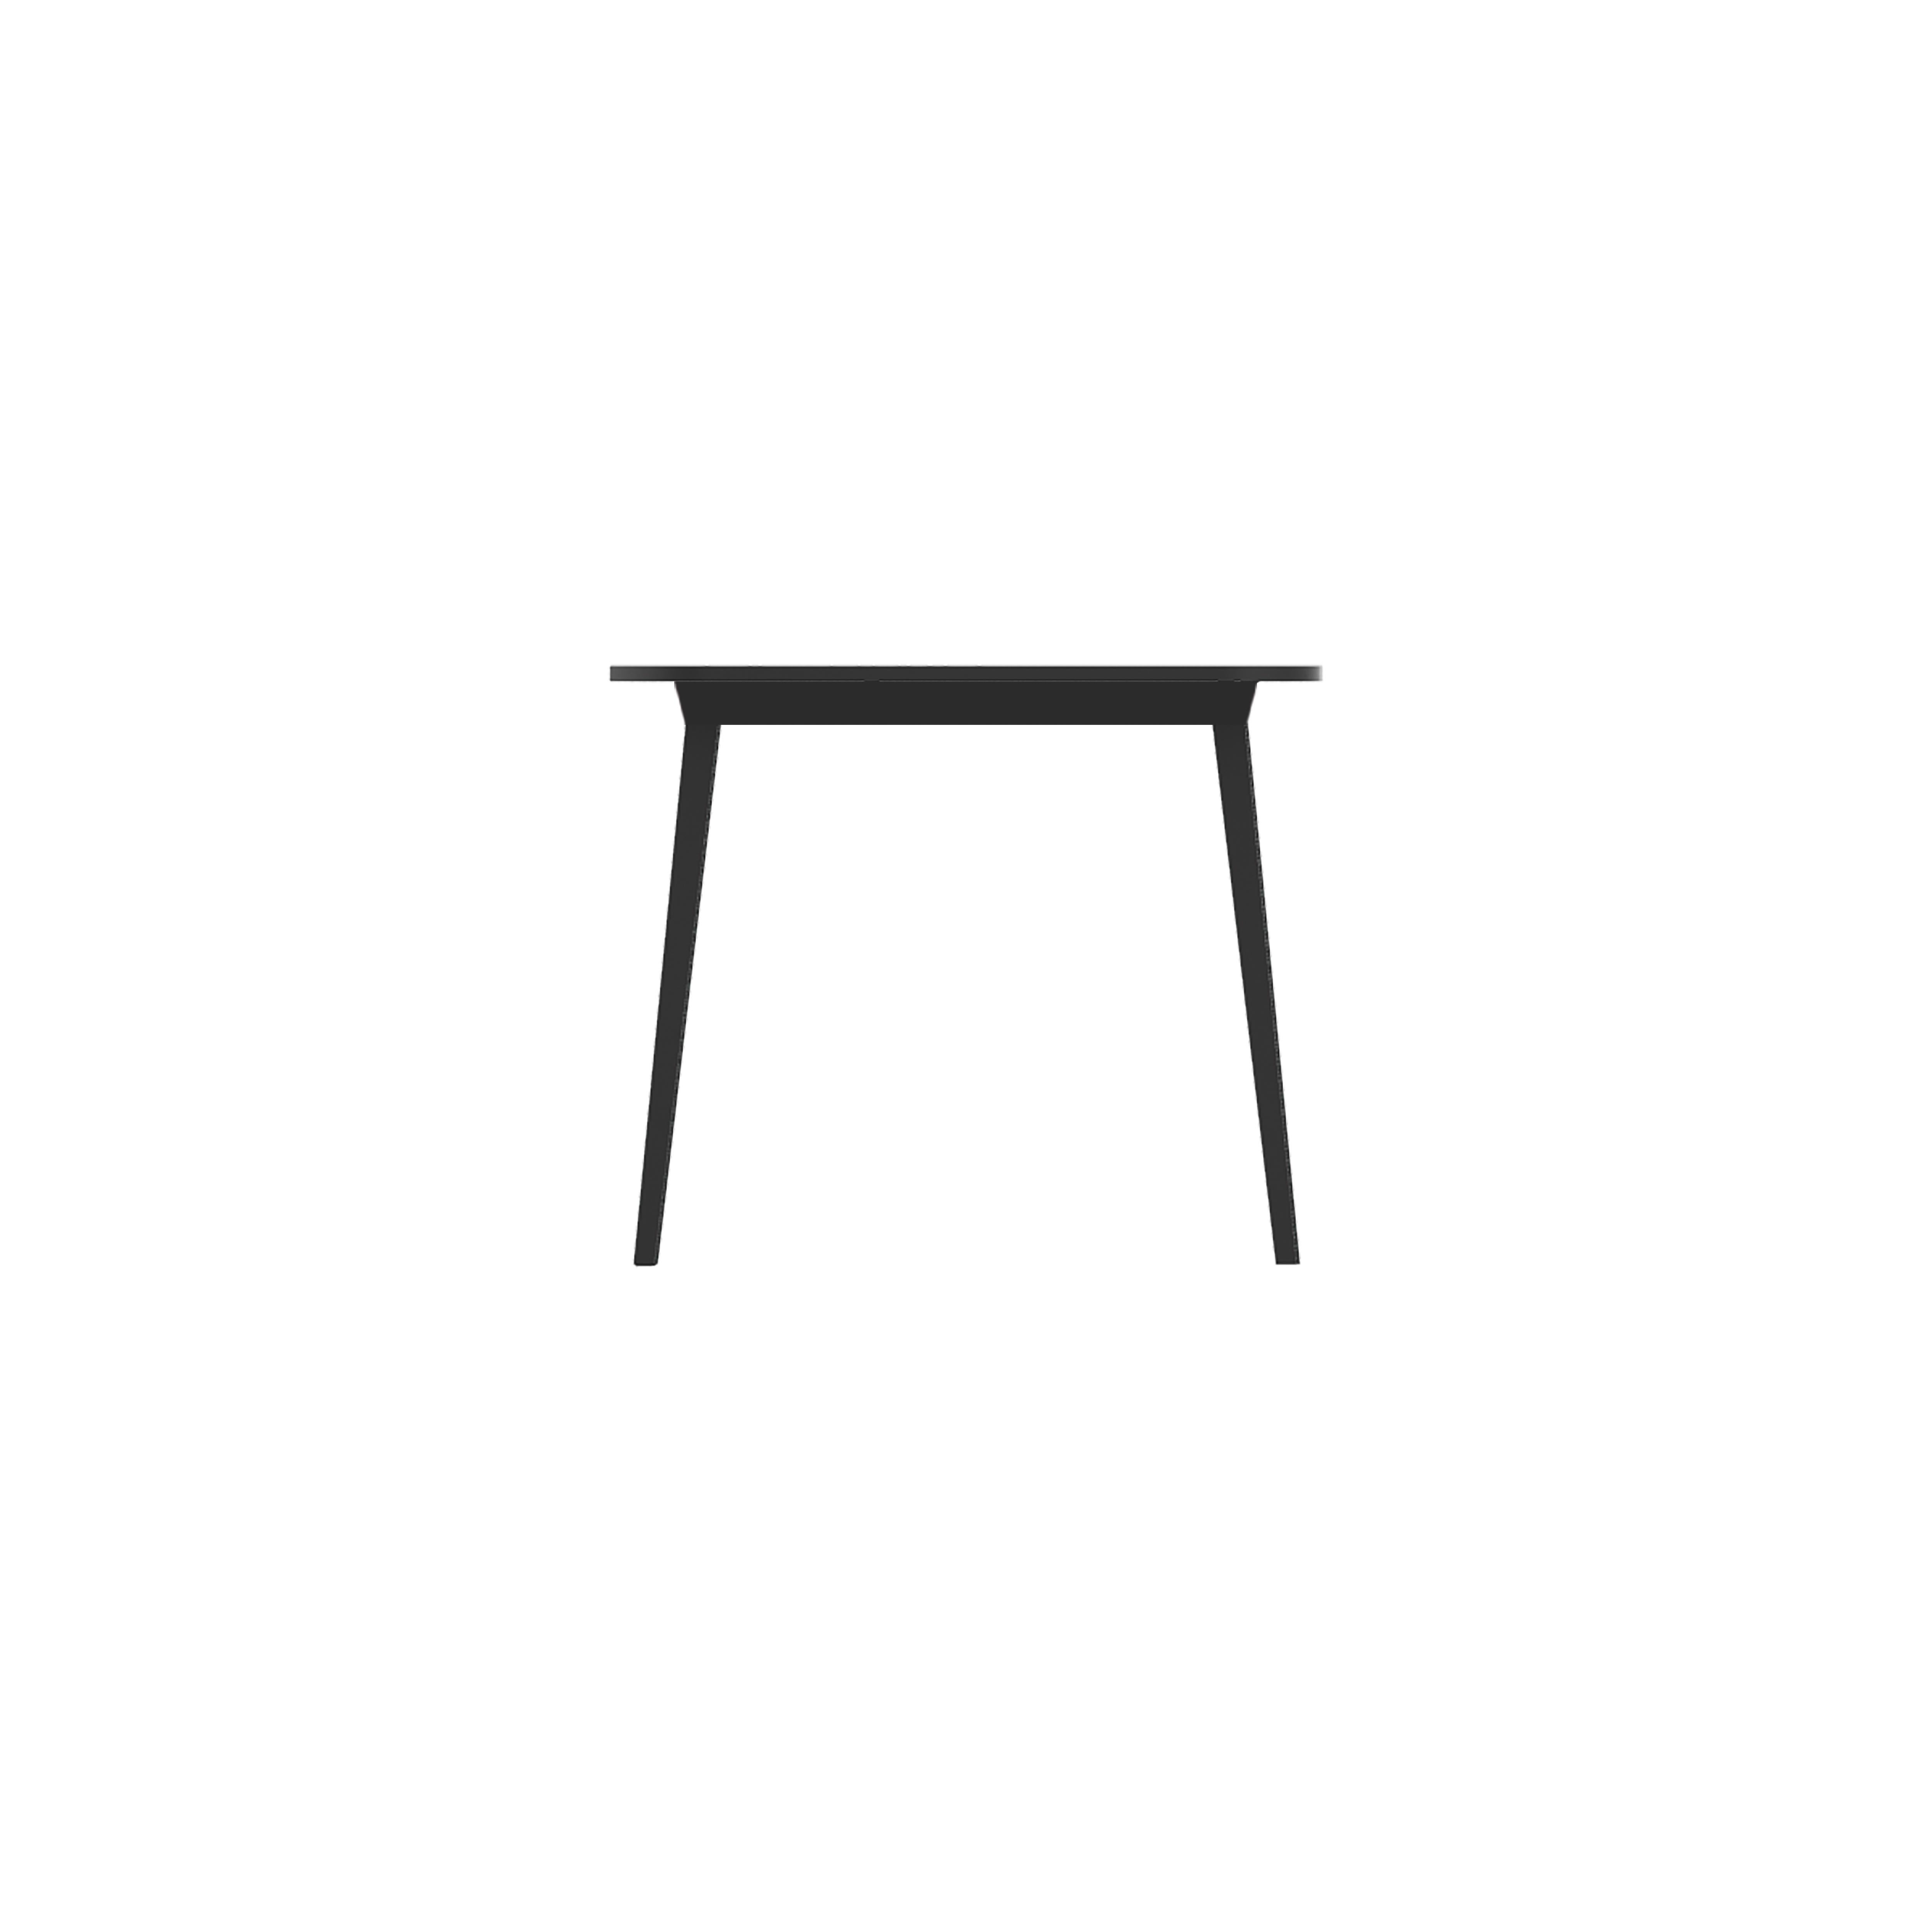 'X' is a family of tables of different sizes, composed of an extensible aluminum structure with wooden top or single-material in total black plastic. The square table with four-seat, ideal for bars and restaurants.

Specifications: Material: